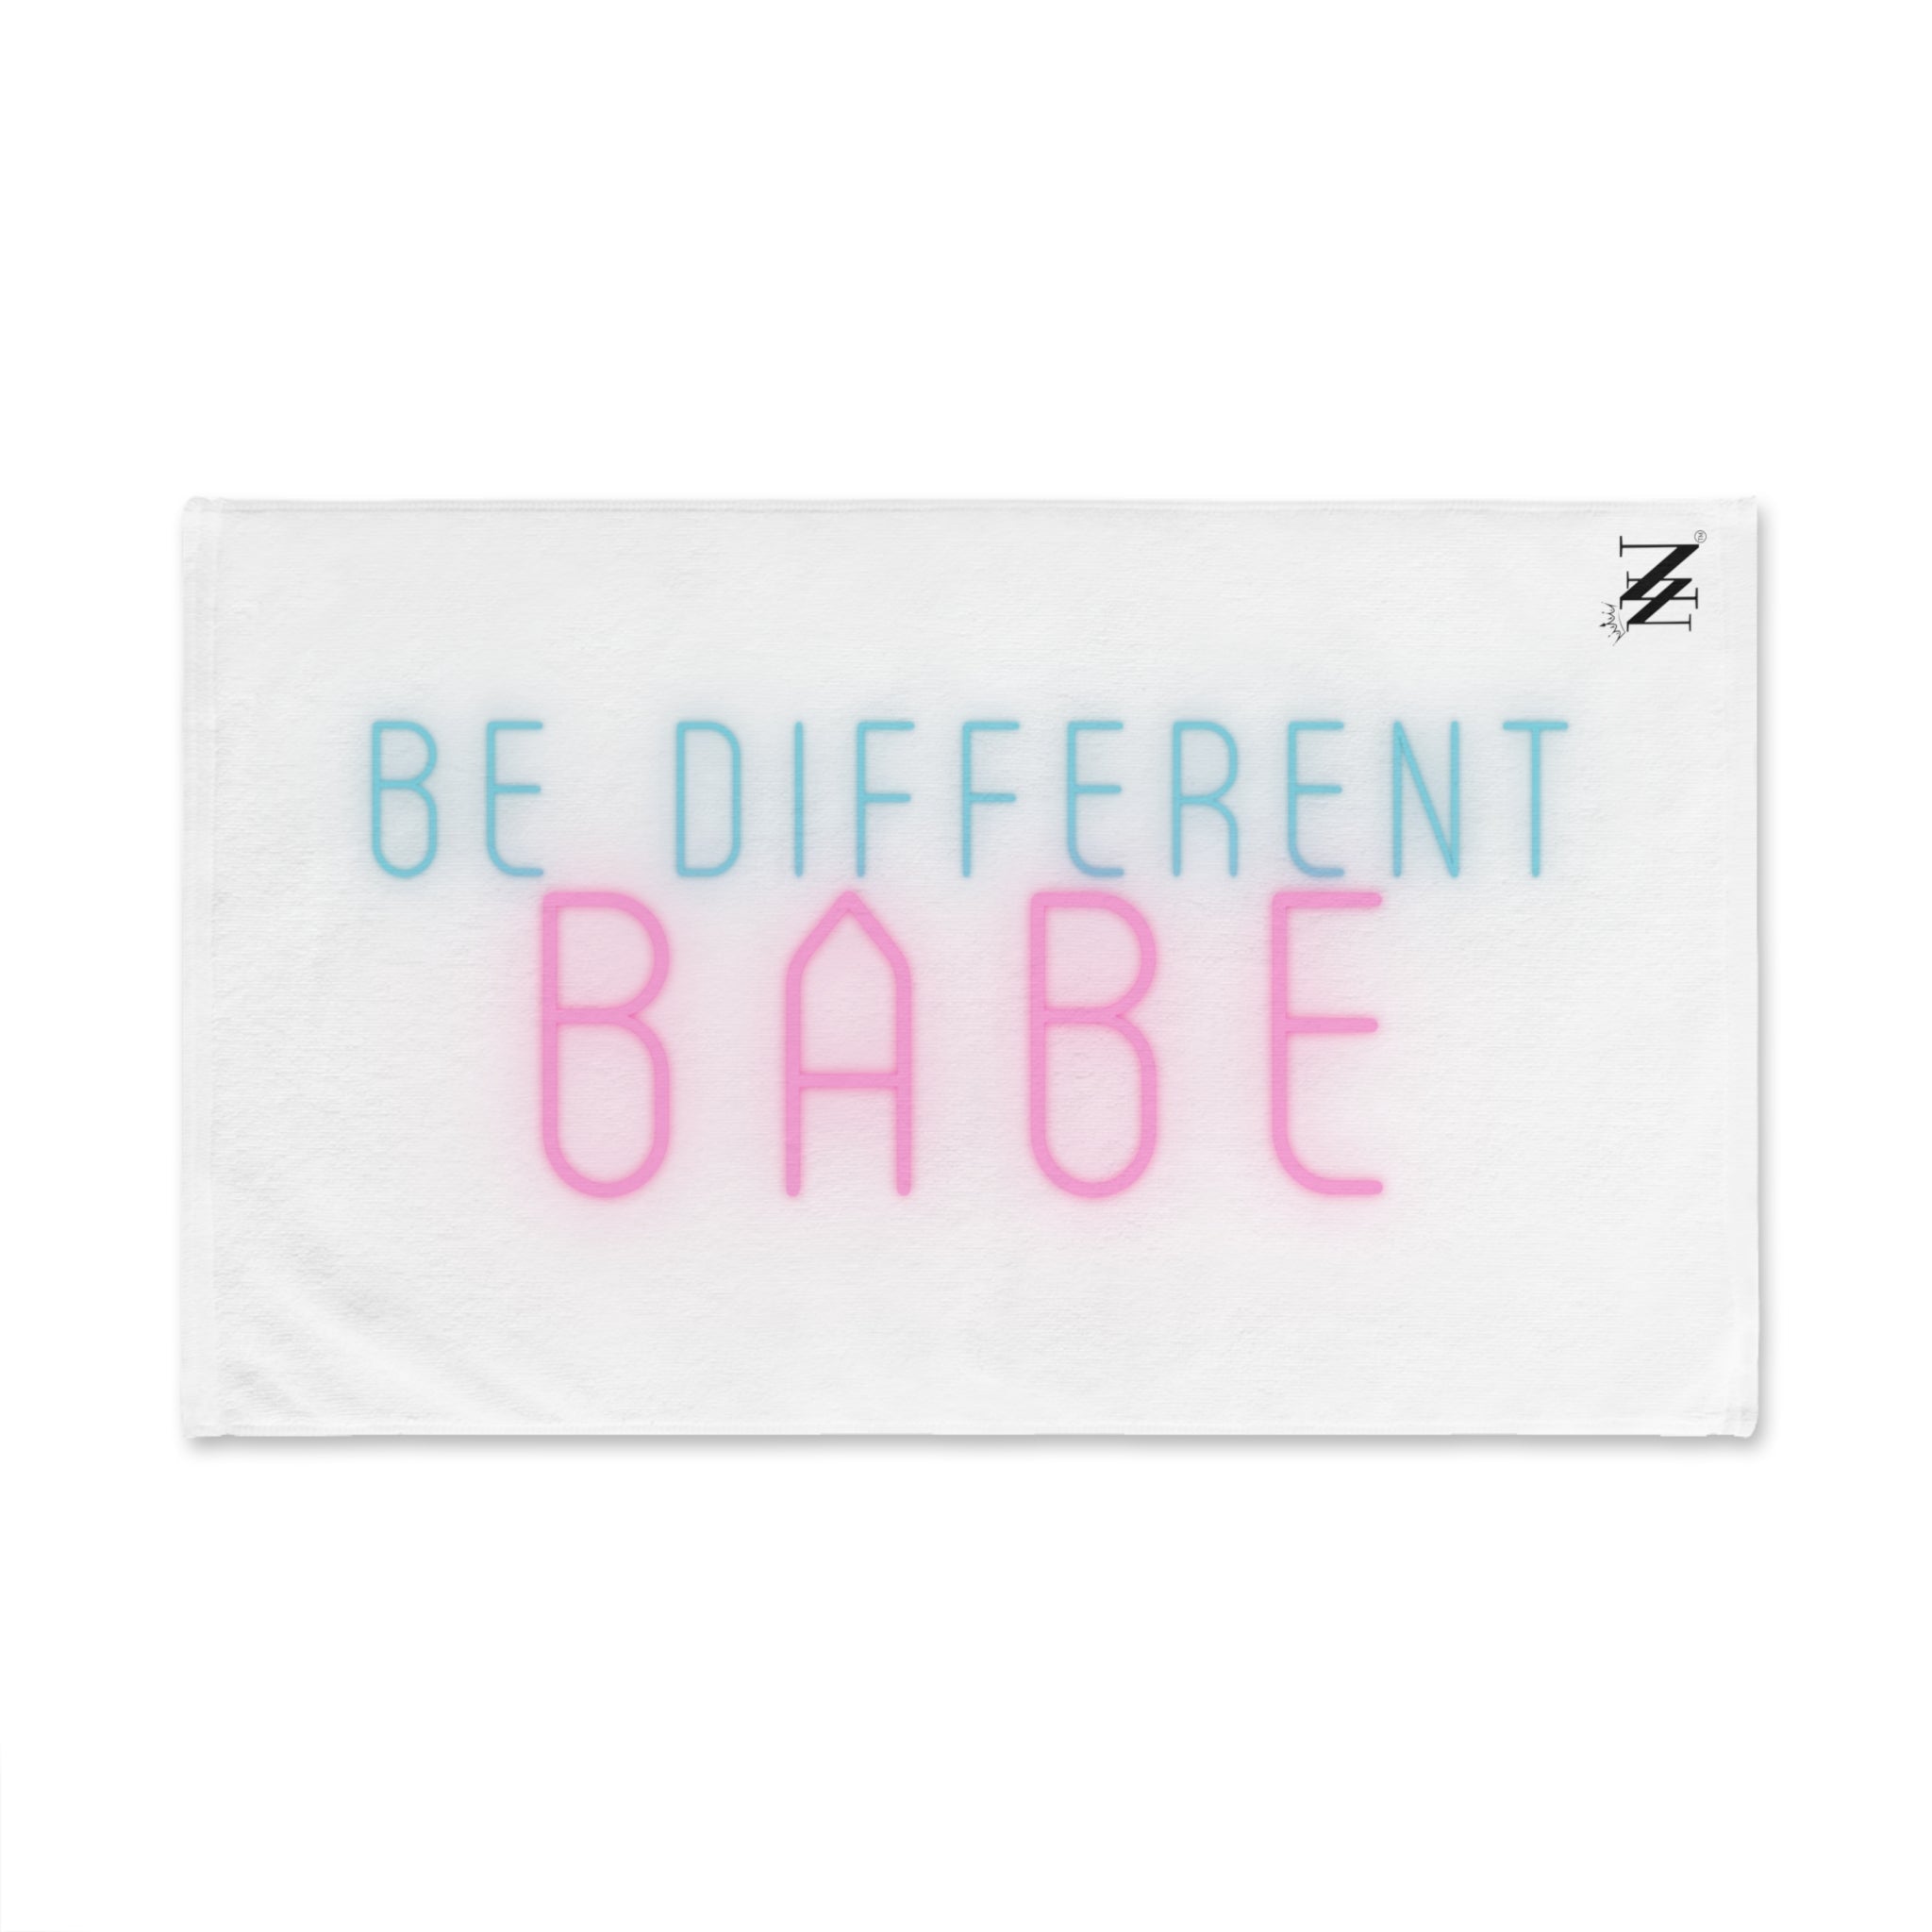 Different Babe White | Funny Gifts for Men - Gifts for Him - Birthday Gifts for Men, Him, Her, Husband, Boyfriend, Girlfriend, New Couple Gifts, Fathers & Valentines Day Gifts, Christmas Gifts NECTAR NAPKINS